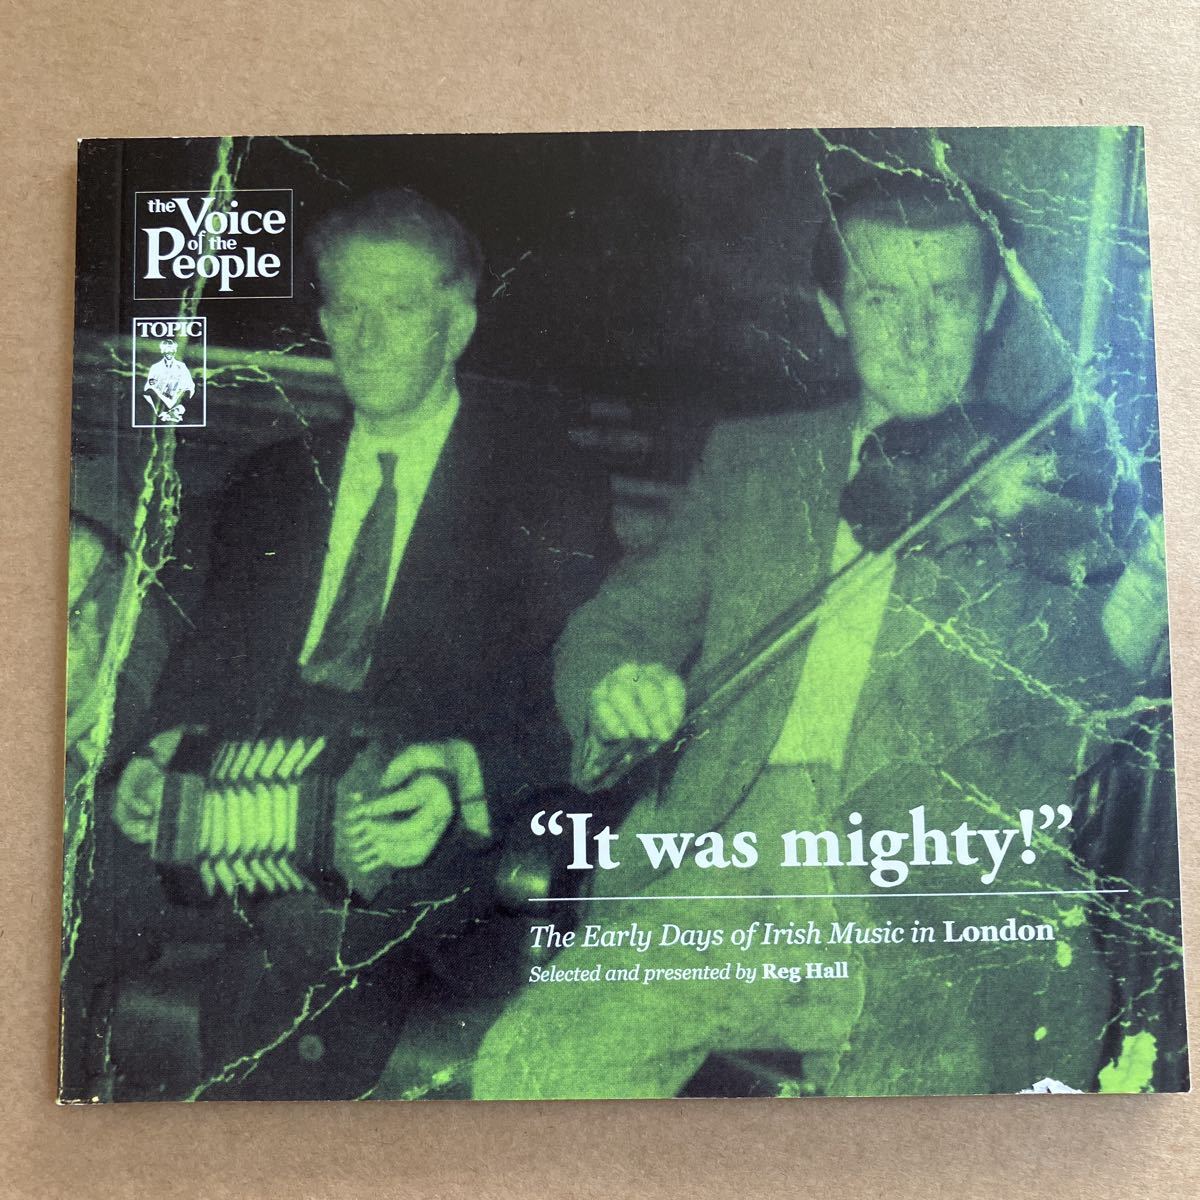 CD It Was Mighty The Early Days of Irish Music in London TSCD679T THE VOICE OF THE PEOPLE 3CD ライナー傷みあり_画像7